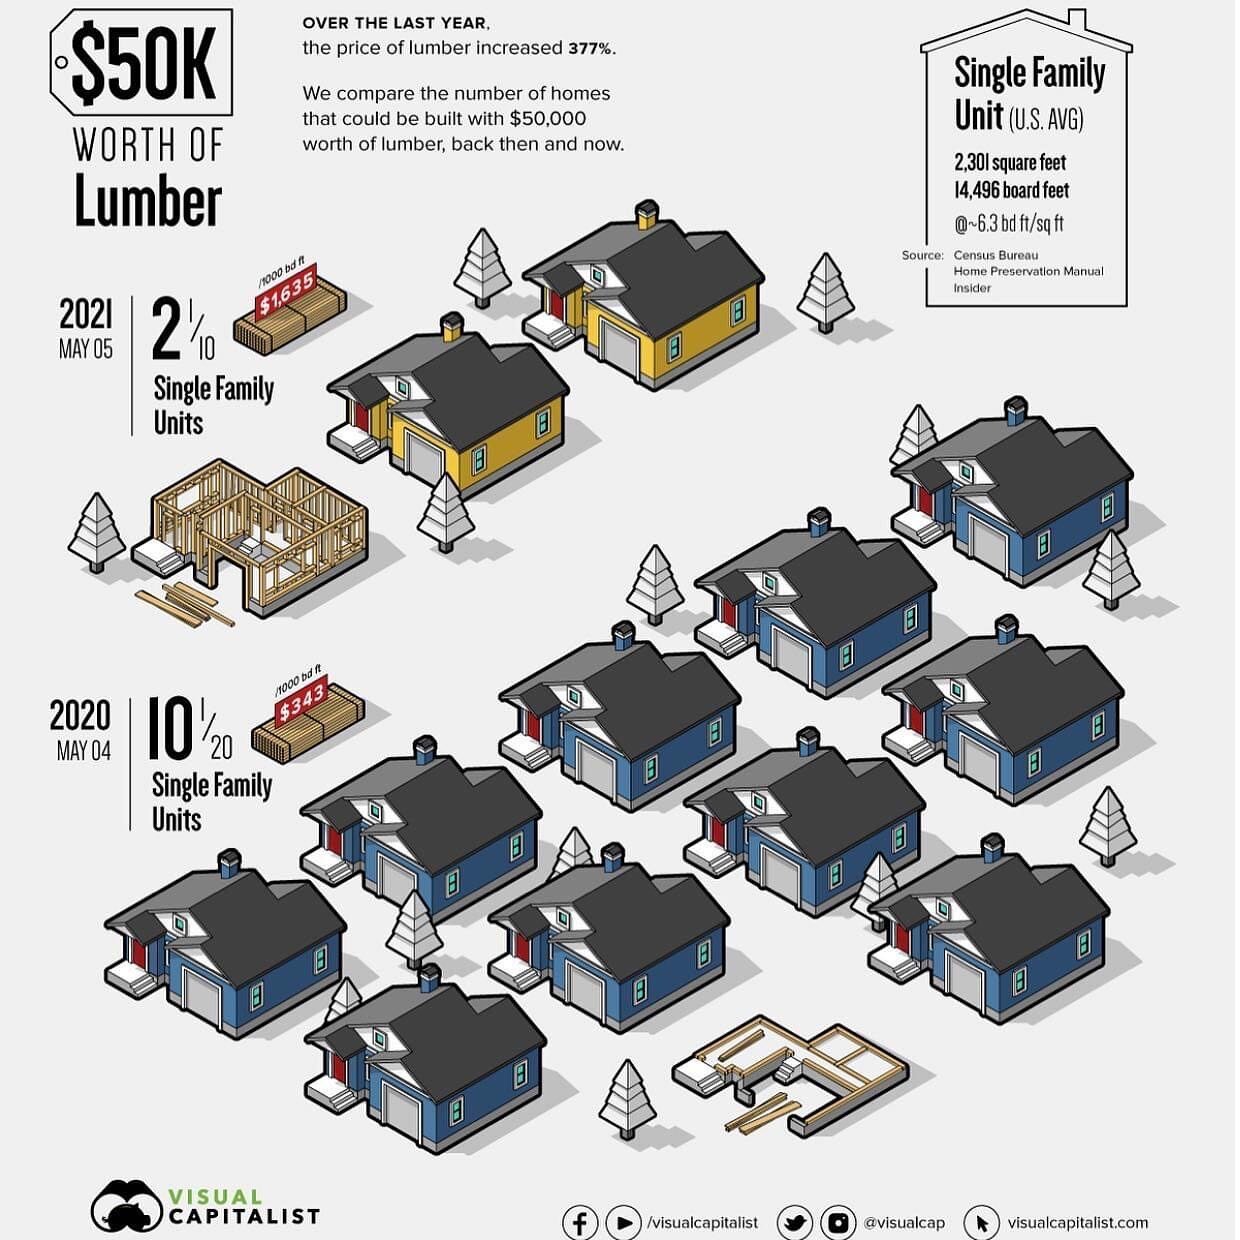 I&rsquo;m not usually one to share infographics like this one&mdash; but I think it gives amazing insight into a small part of why buying a new build is becoming increasingly more expensive and difficult. 

With lumber shortages, builders are only ab